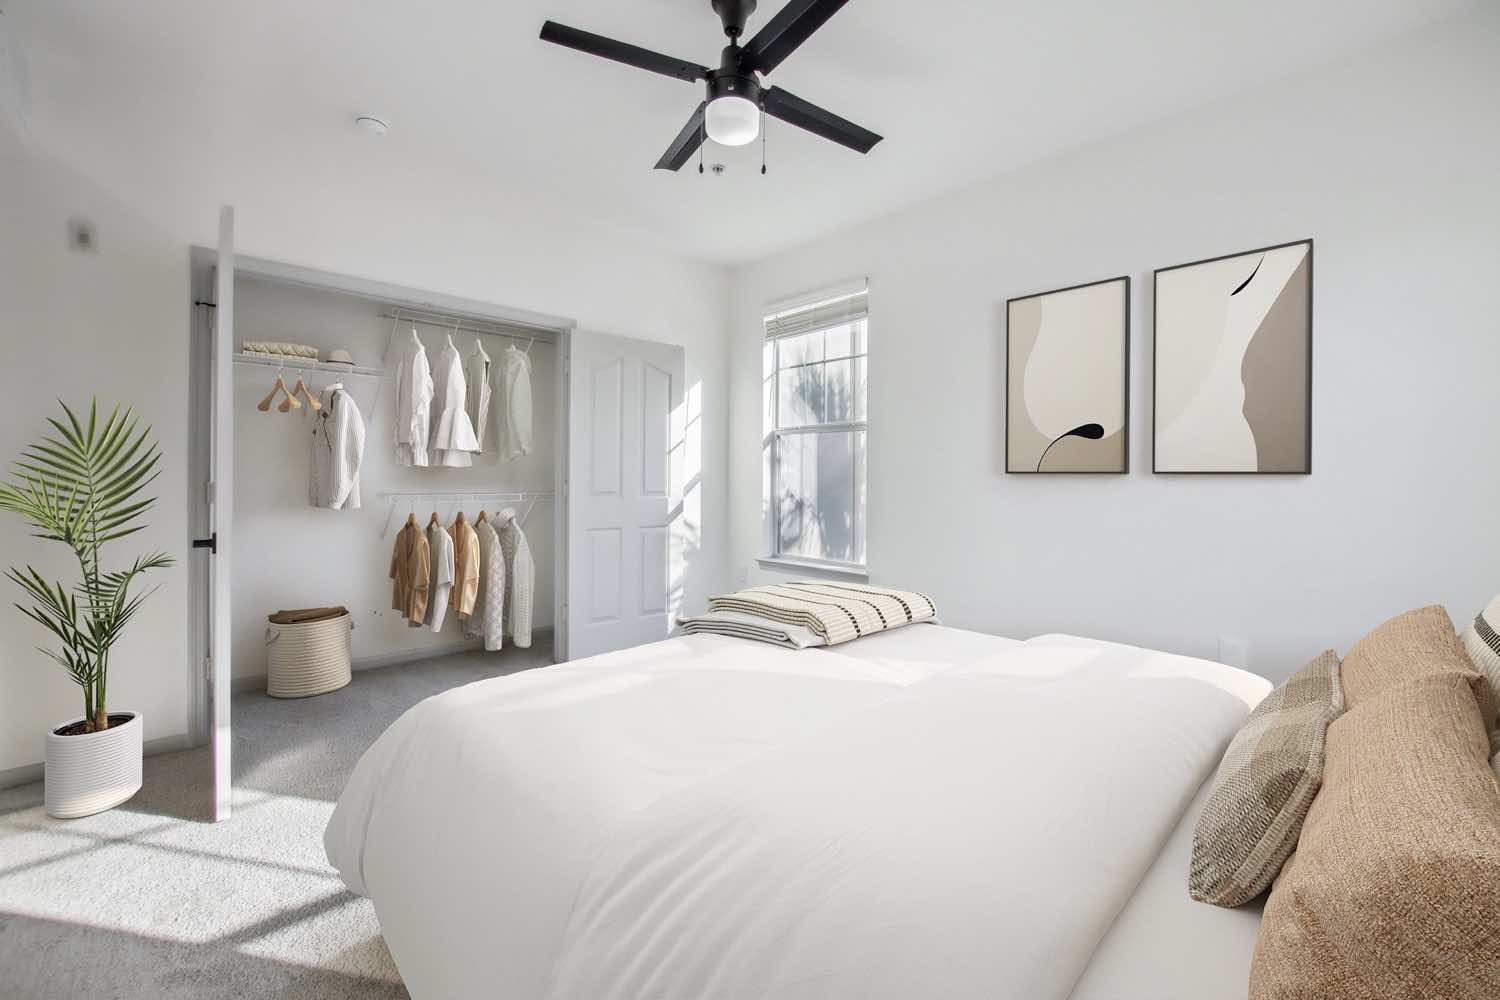 bedroom with wood-style flooring, reach-in closet, and ceiling fan